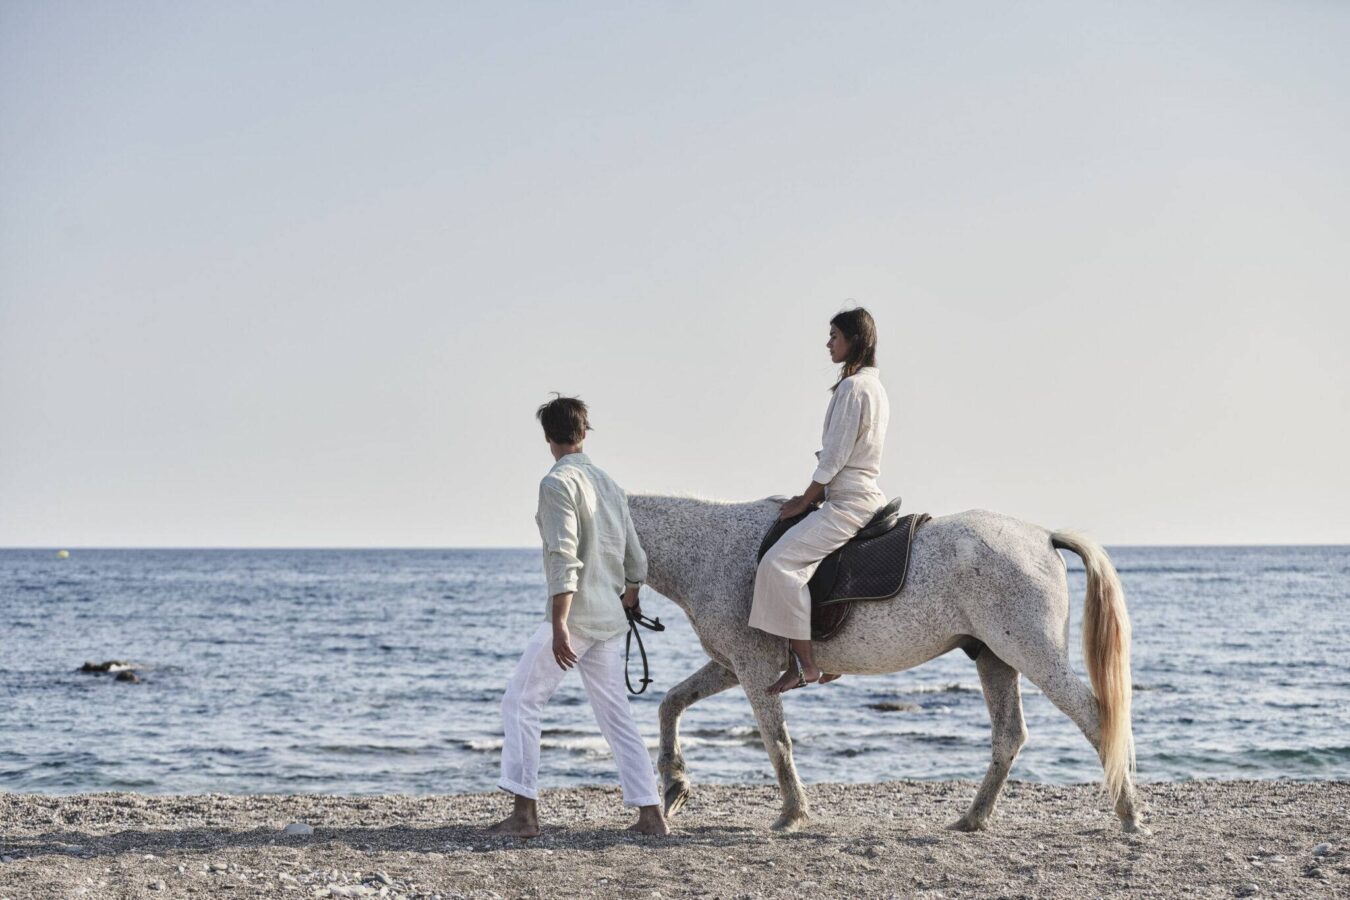 Horse riding is on of the immersive experiences in Rhodes with H Hotels Collection.